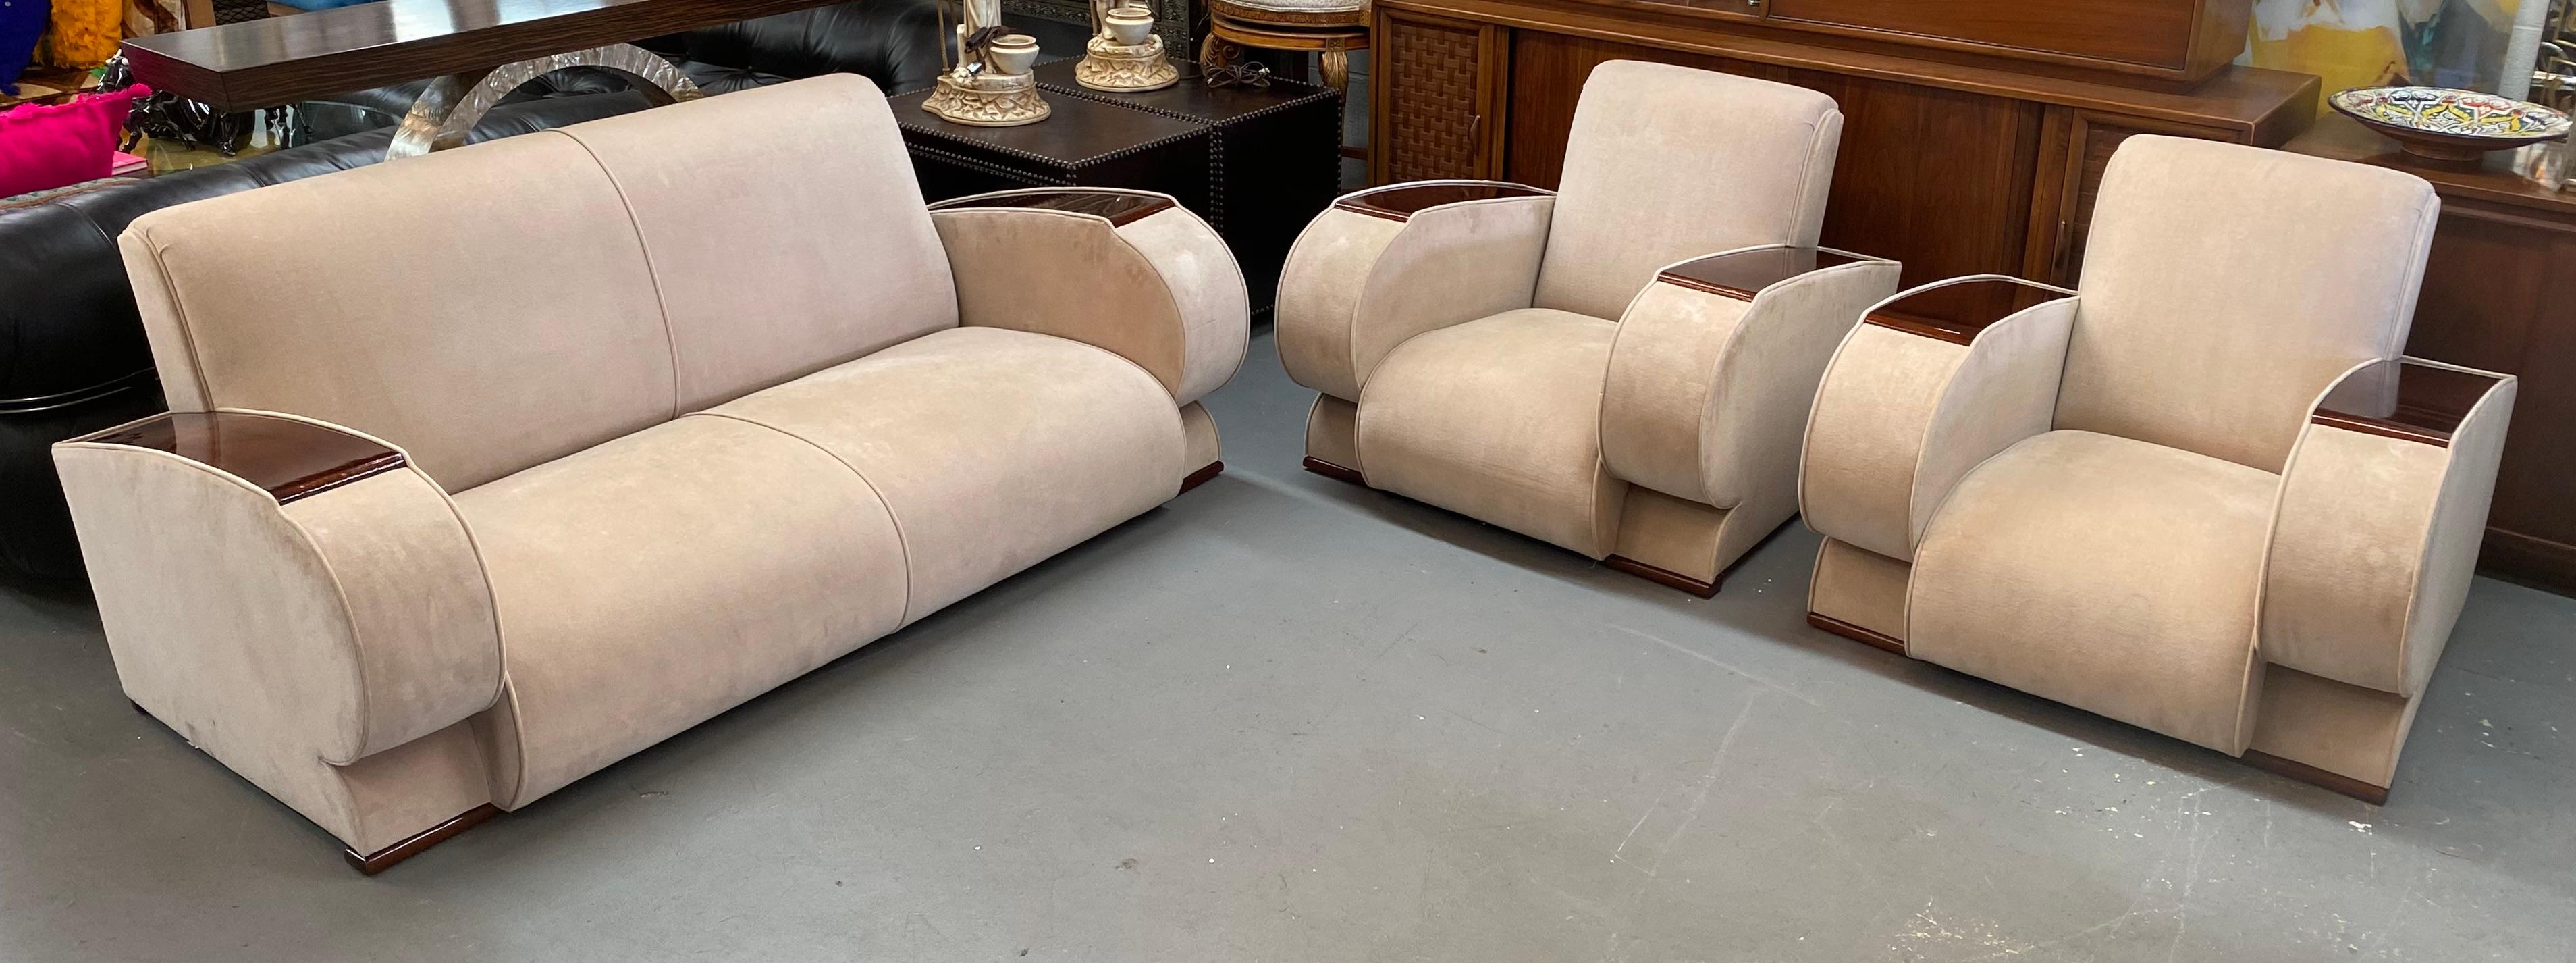 A remarkable living room set comprising French Art Deco lounge or club chairs, accompanied by a Sofa or Settee. These pieces of furniture effortlessly encapsulate the essence of the Art Deco aesthetic.

The upholstery adorning these distinguished